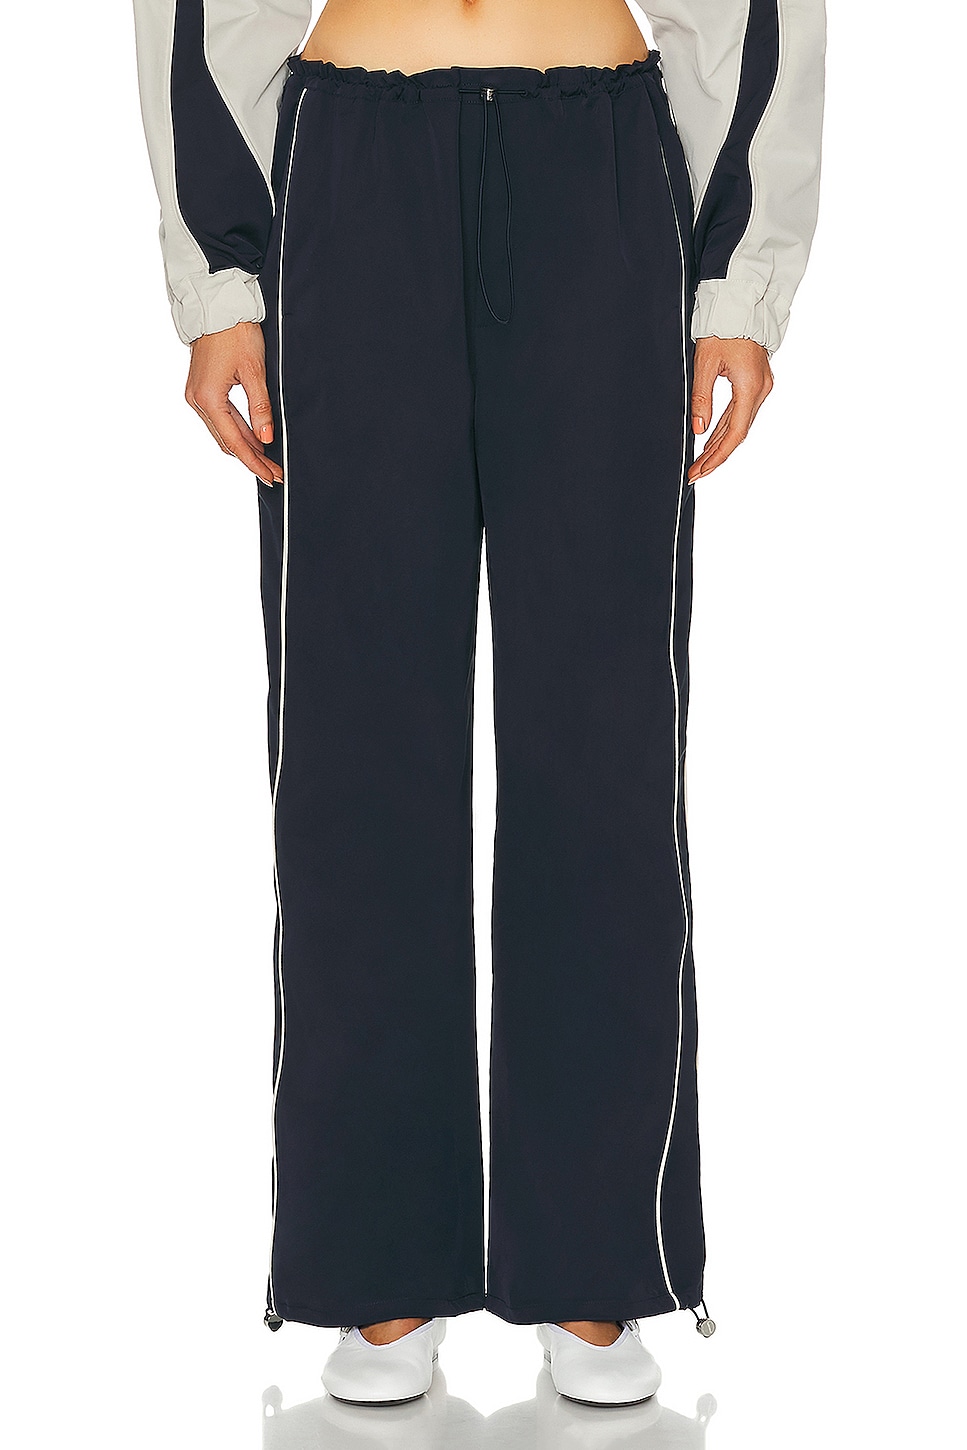 Image 1 of GRLFRND Cinched Waist Wide Leg Pant in Navy & Ivory